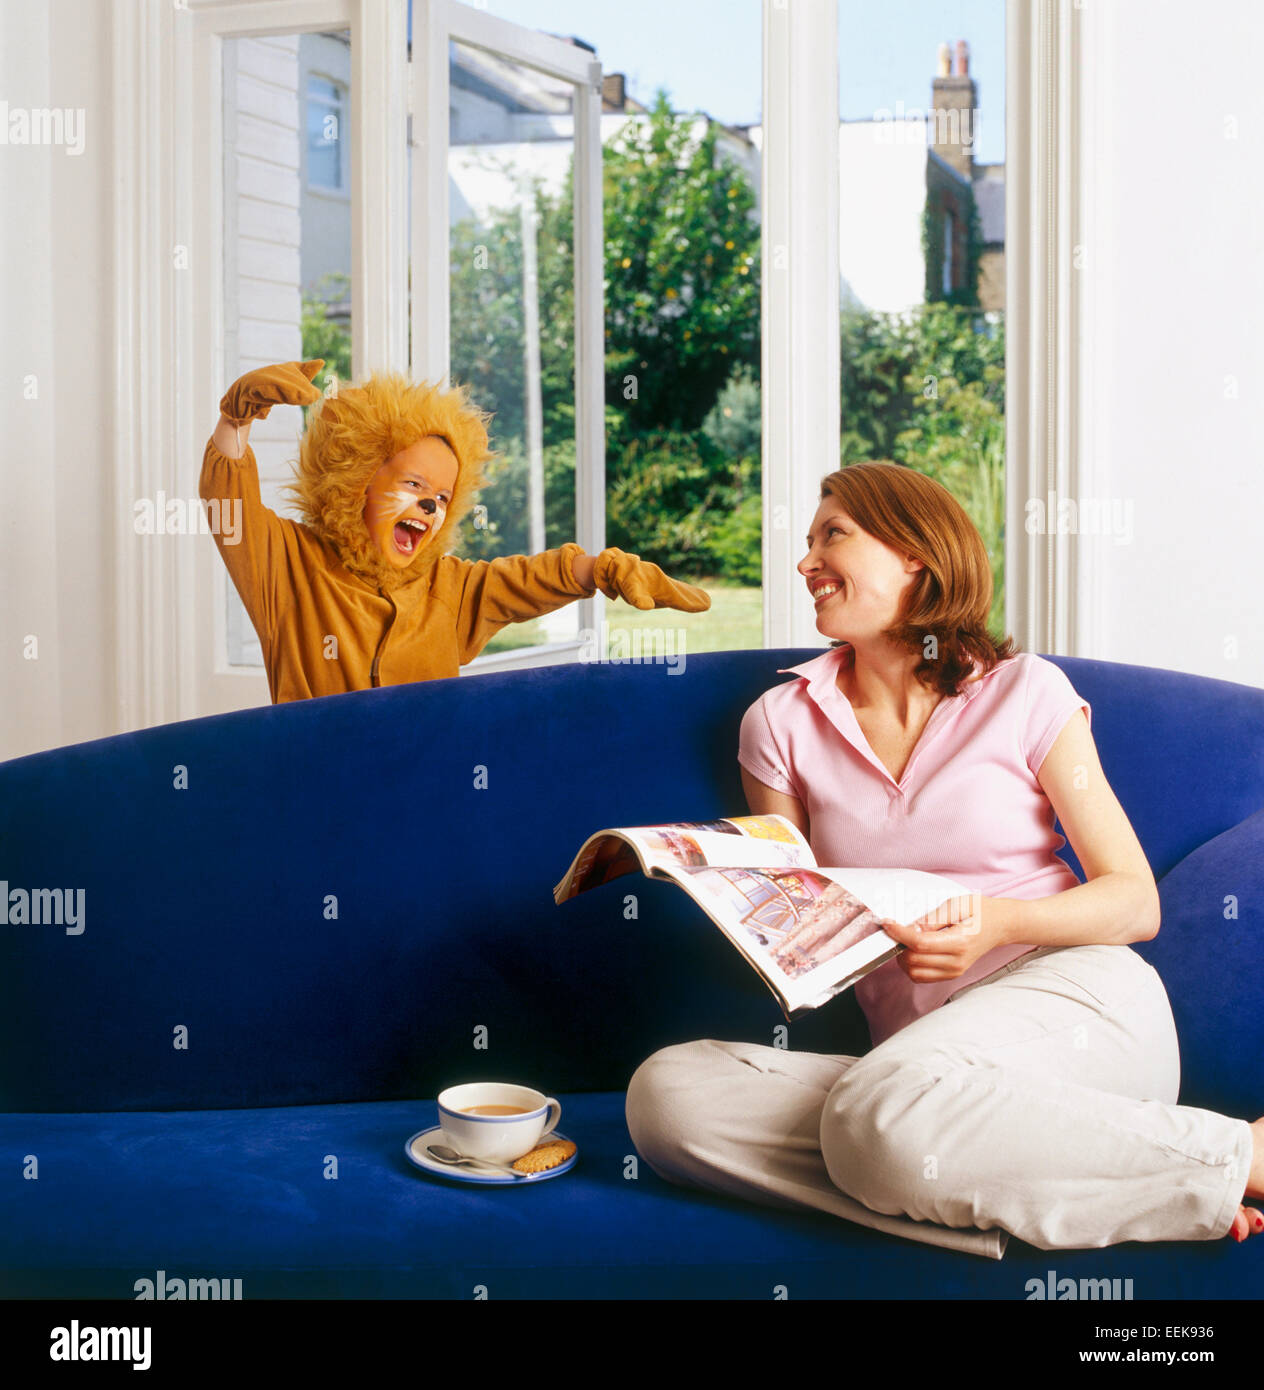 Mum at home sitting relaxing, reading a newspaper, her child dressed as lion surprises her from behind the sofa, roaring scarily Stock Photo